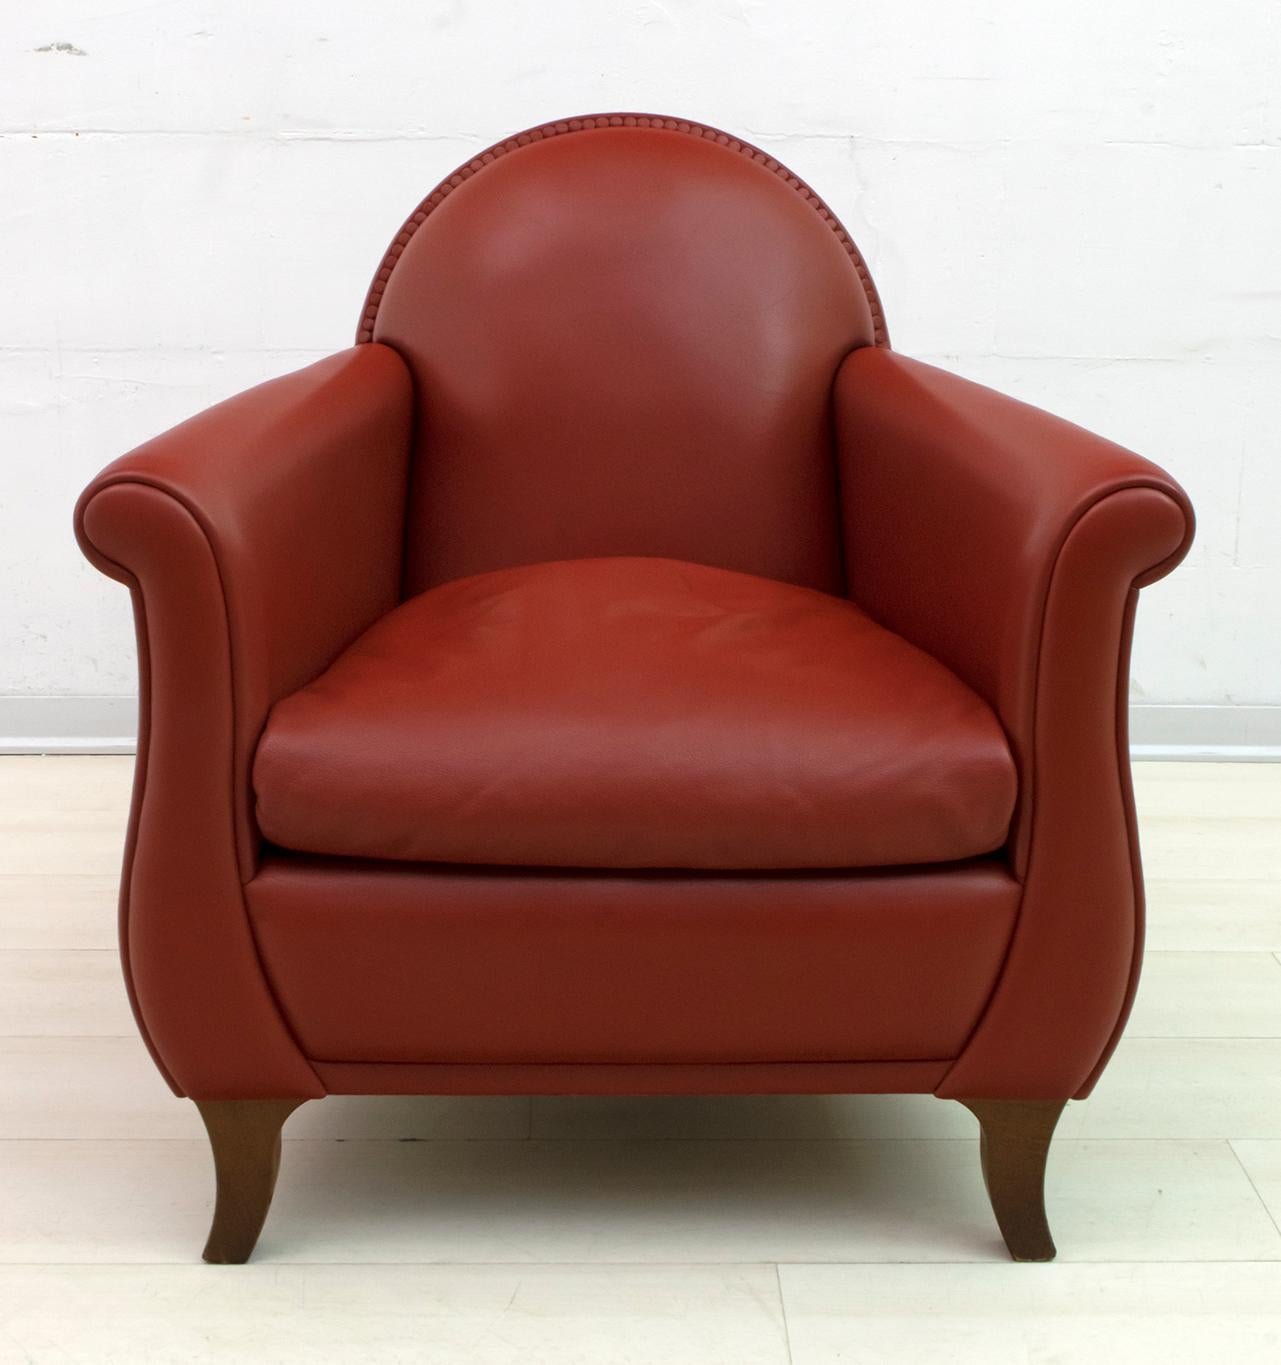 The Poltrona Frau Lyra armchair is an iconic design from the historical collection of Poltrona Frau. The Lyra, fully made from leather, was first noticed in 1934 and can be seen as a further development of the ‘Lira’ armchair, originating from 1916,